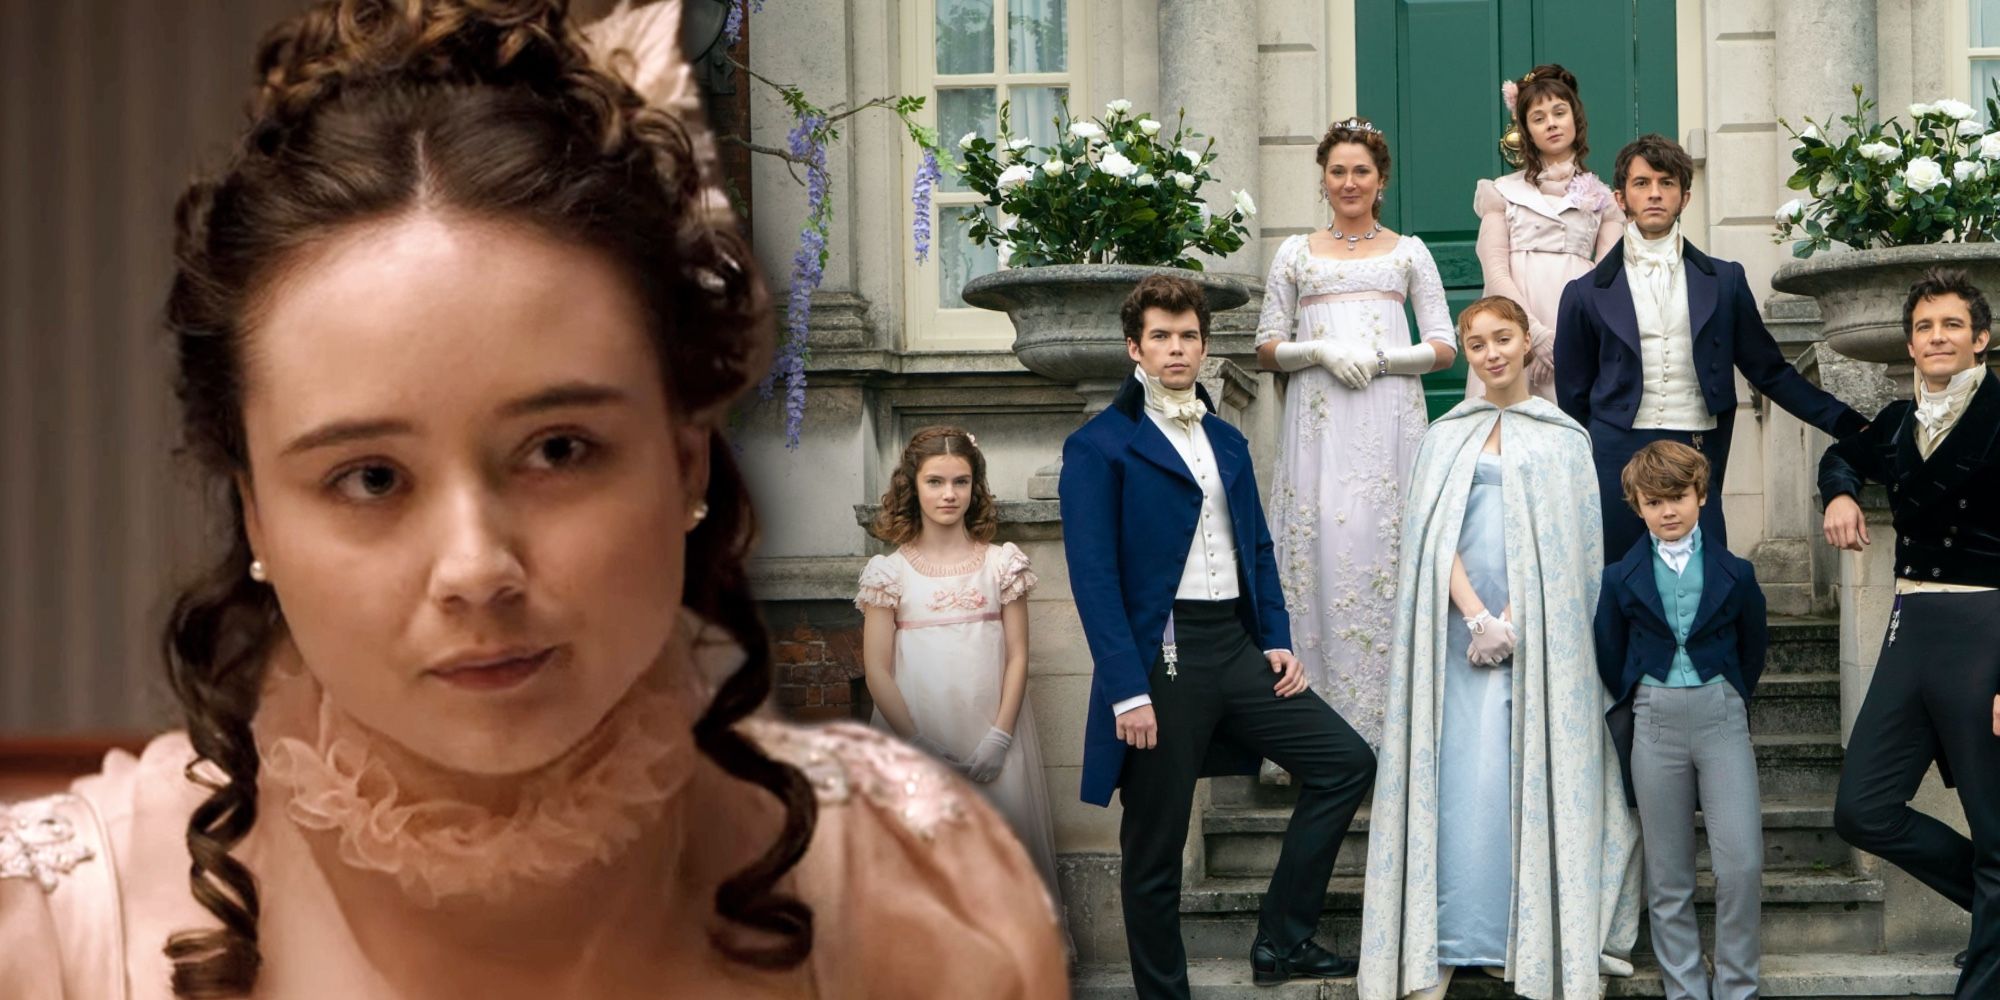 A blended image features Ruby Stokes as Francesca Bridgerton in Bridgerton on Netflix alongside the family portrait of her Bridgerton siblings with their mother